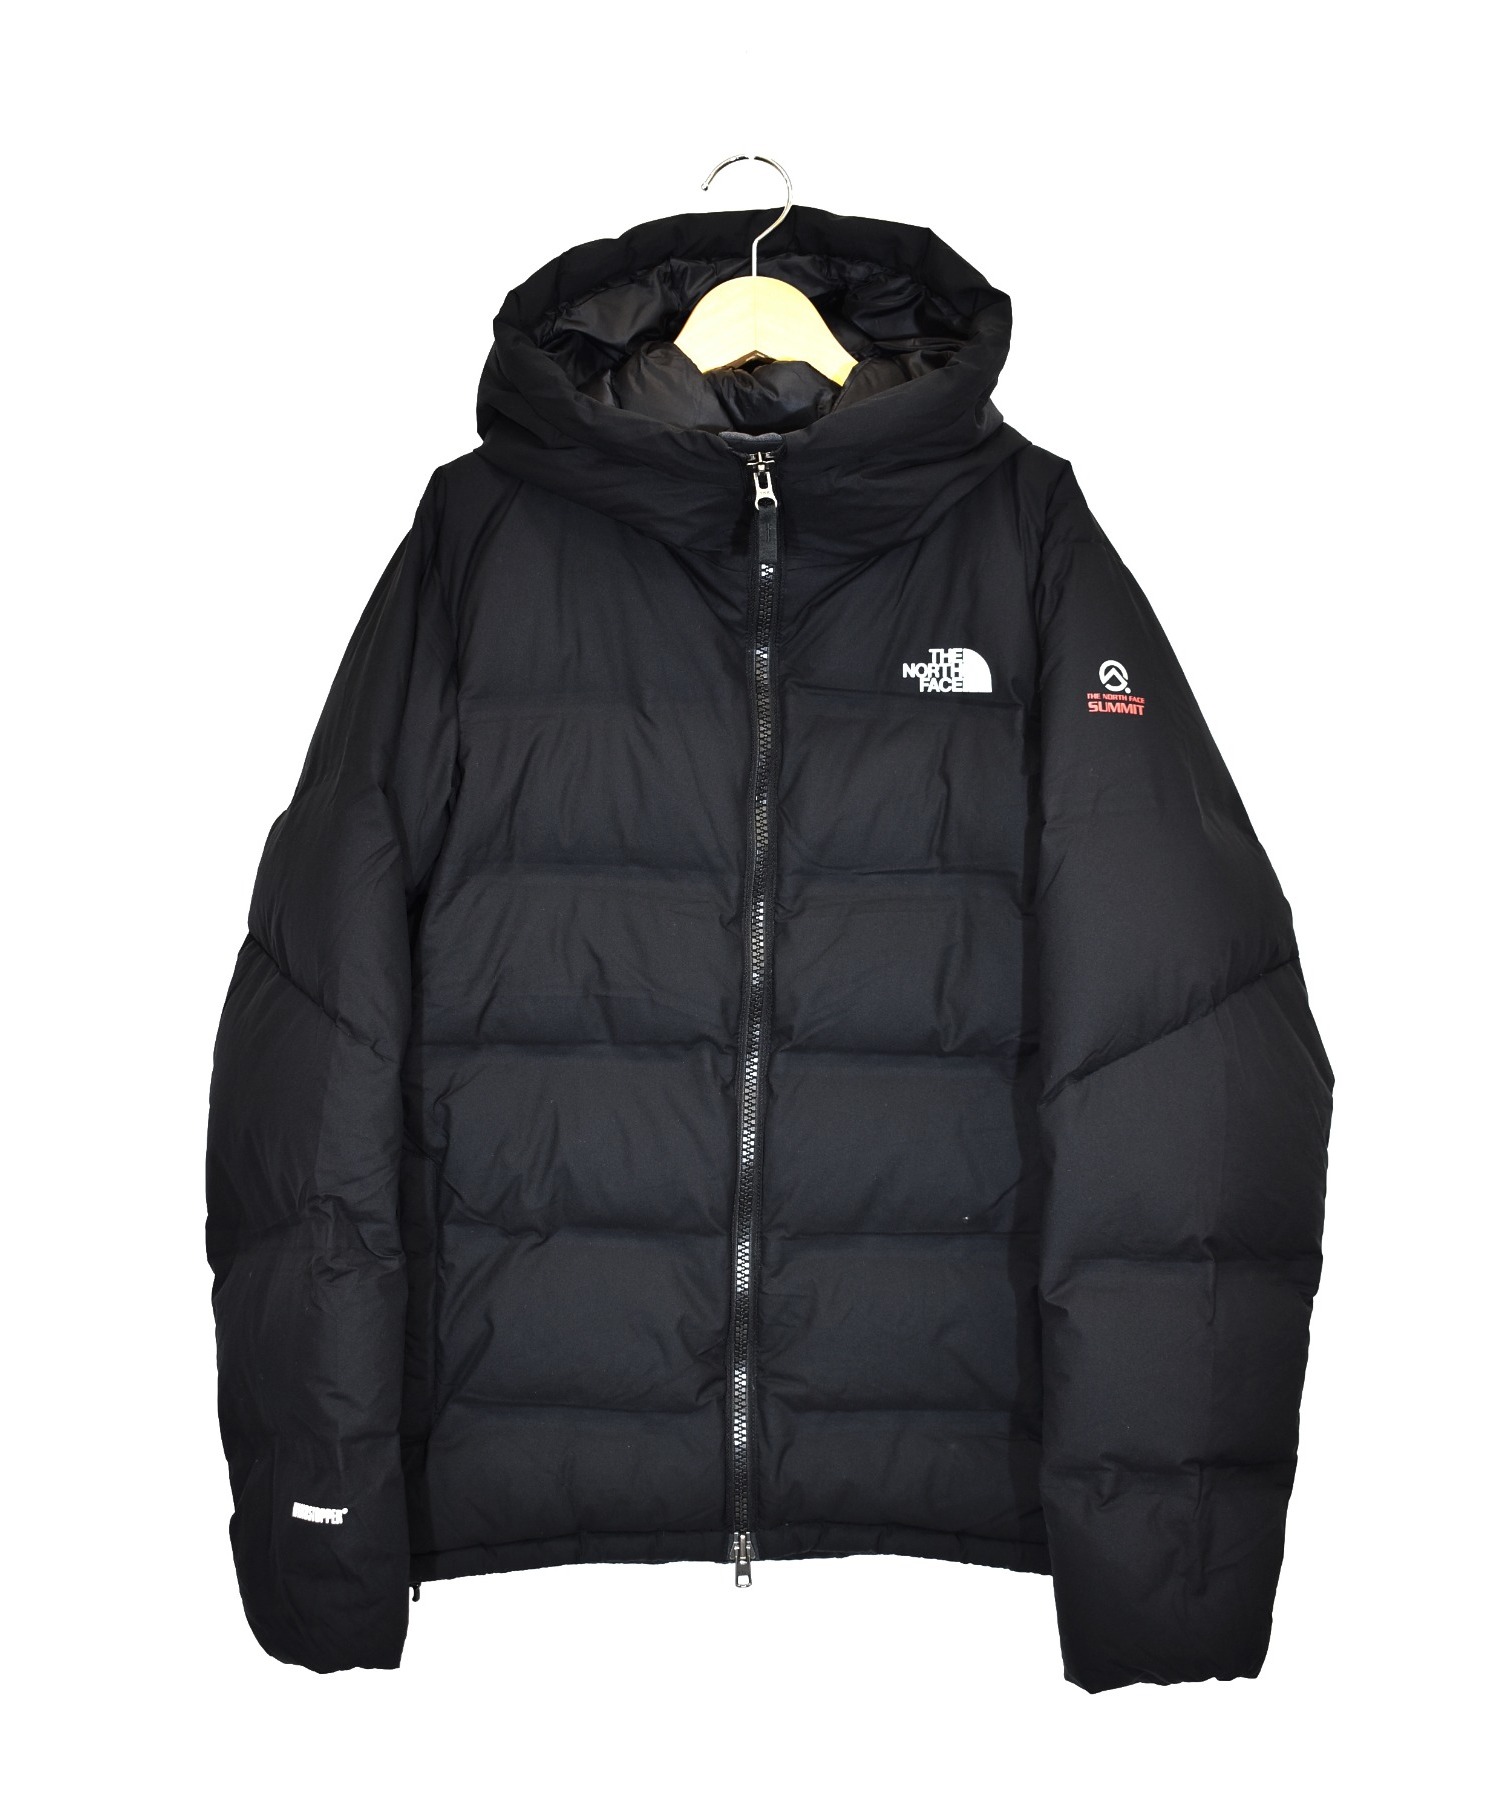 THE NORTH FACE - THE NORTH FACE ビレイヤーパーカ Sの+